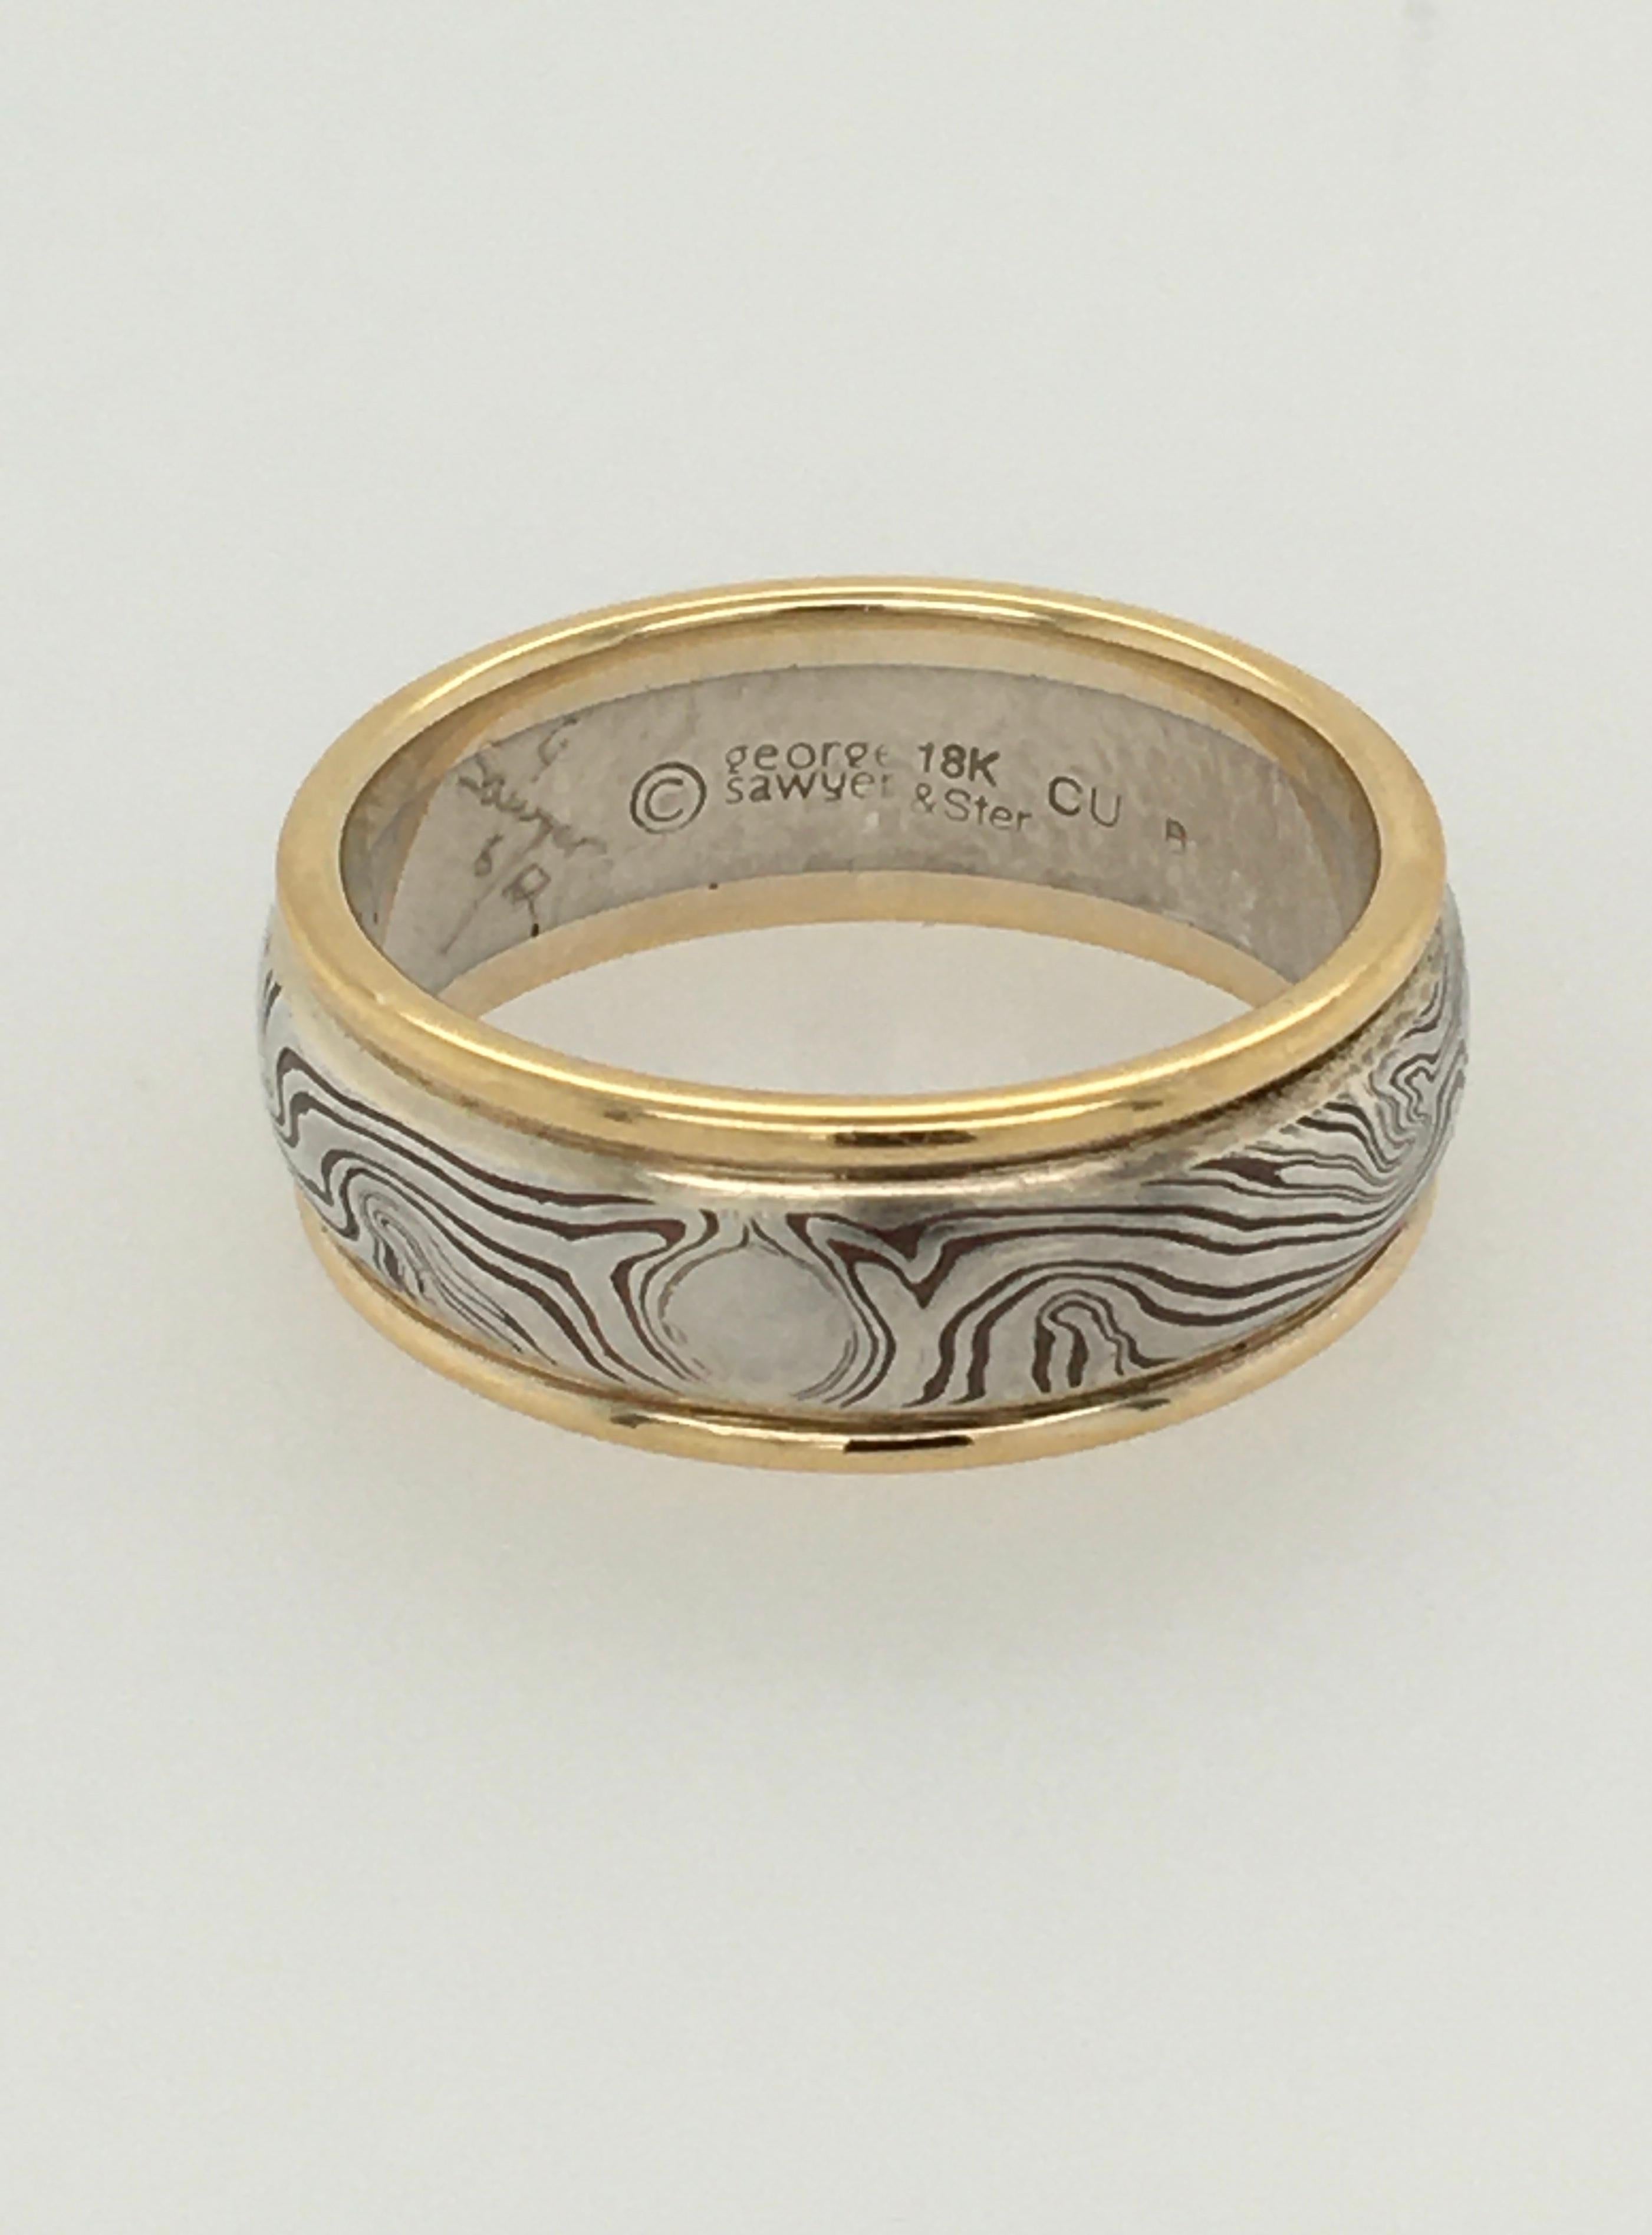 A striking round edge wedding band in the traditional George Sawyer Mokume style.  This 8 mm ring features 18K yellow gold edges surrounding sterling silver & etched copper. Interior stamp 